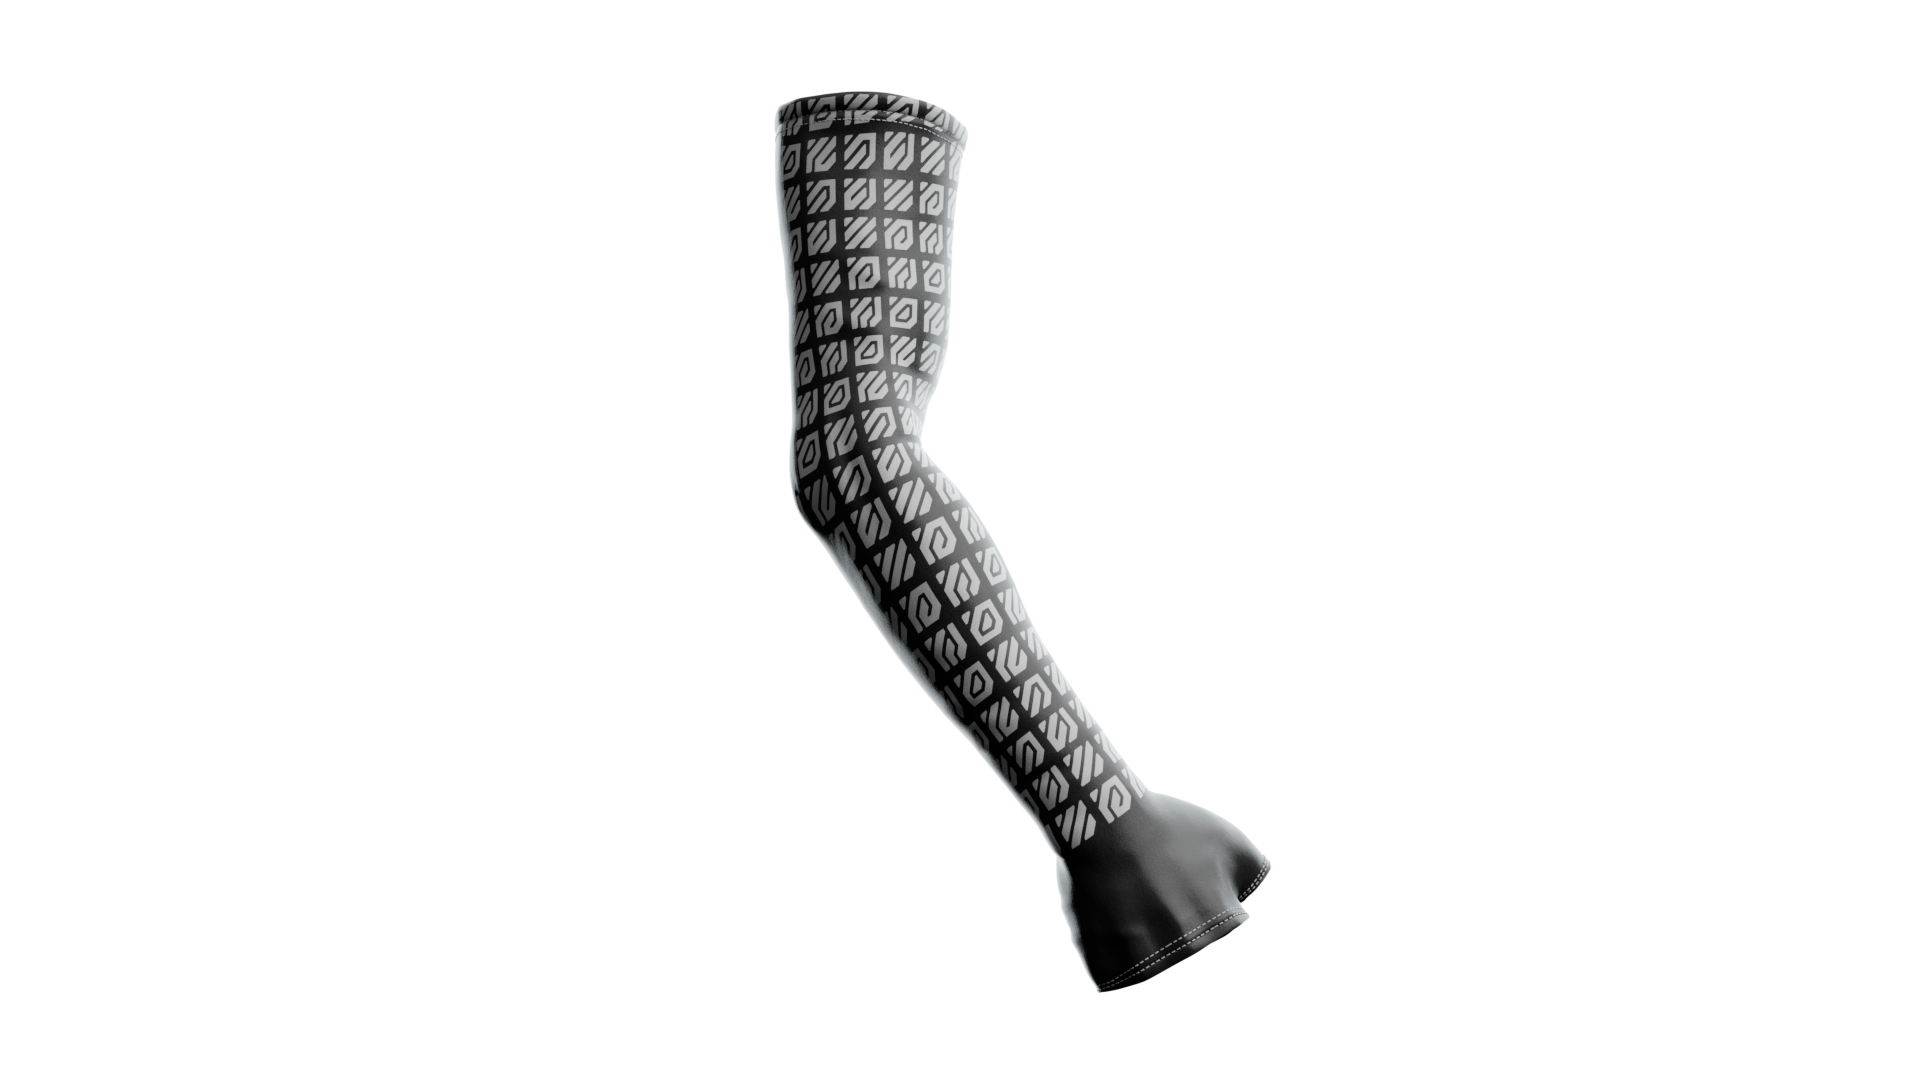 A black and white gaming compression arm sleeve with glove featuring a repeating logo